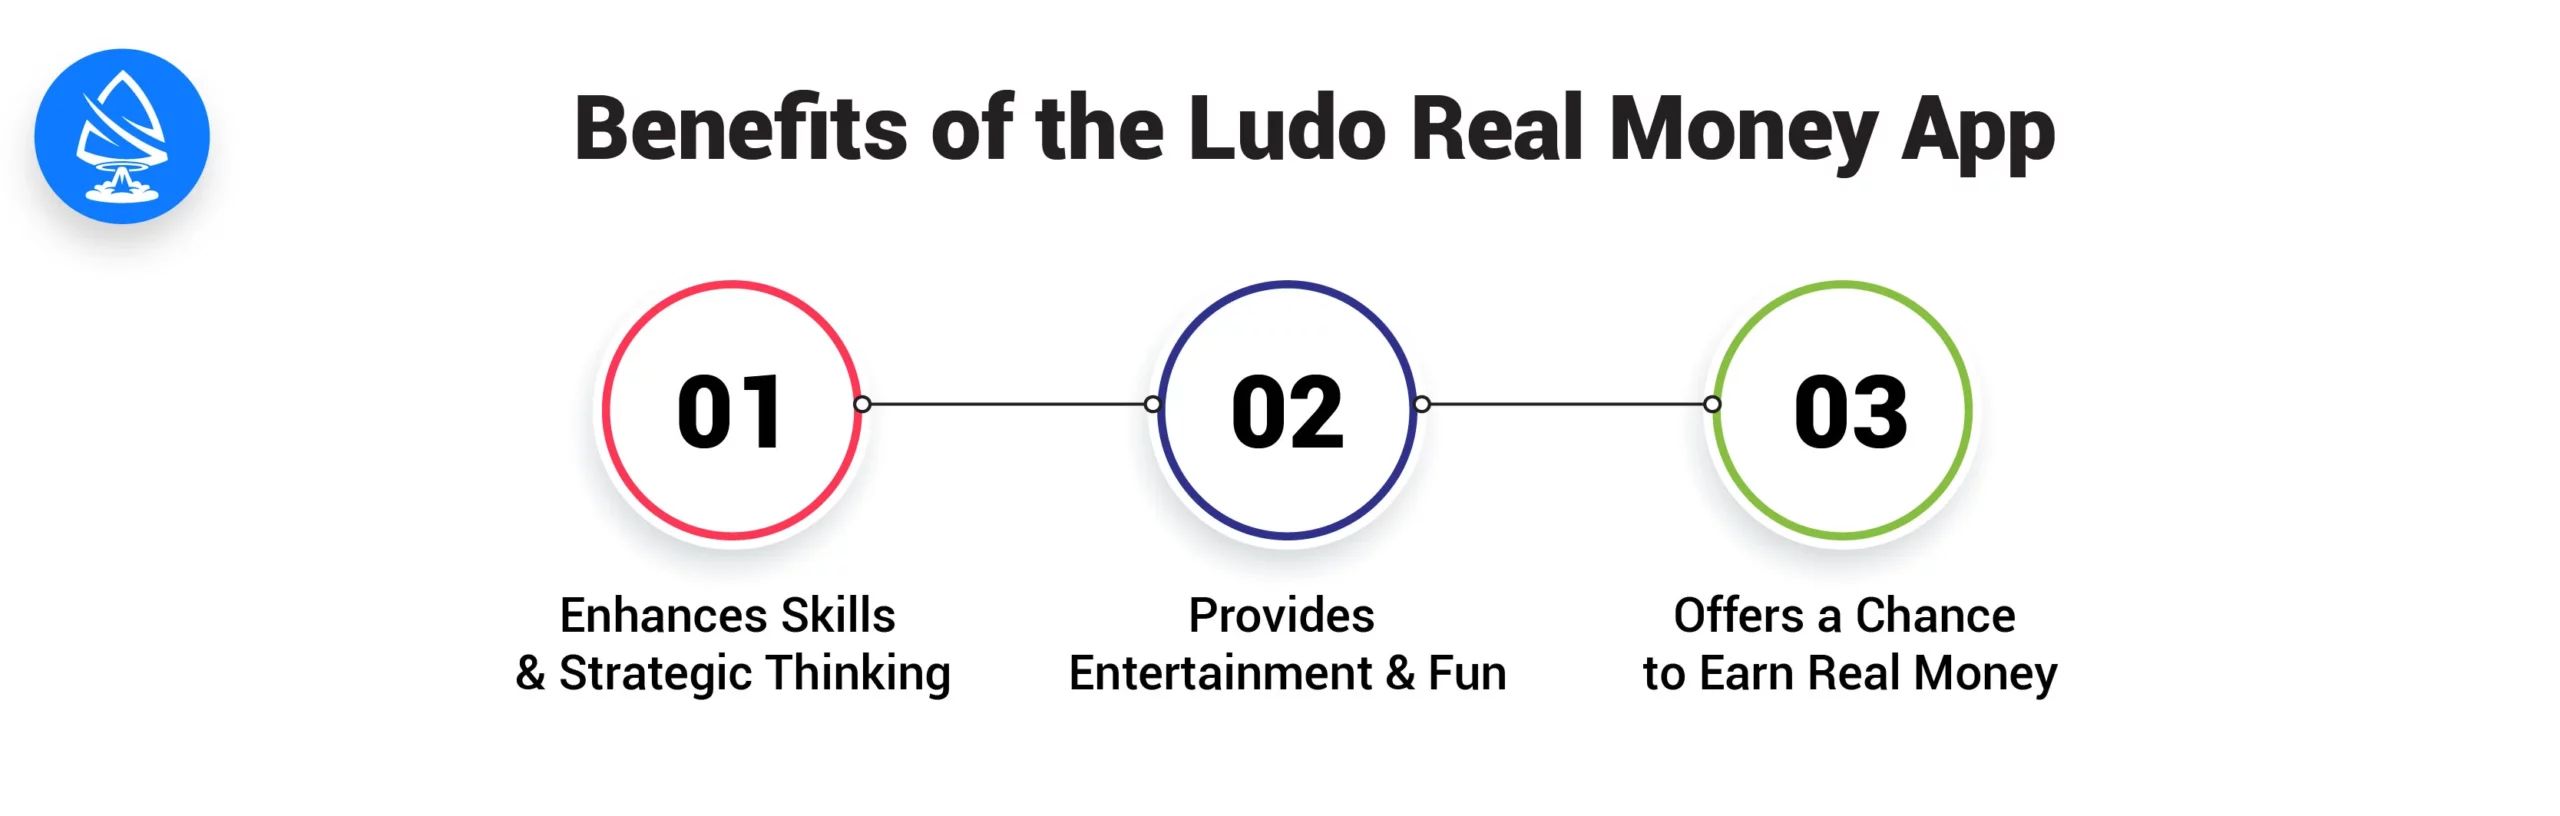 Benefits of The Ludo Real Money App